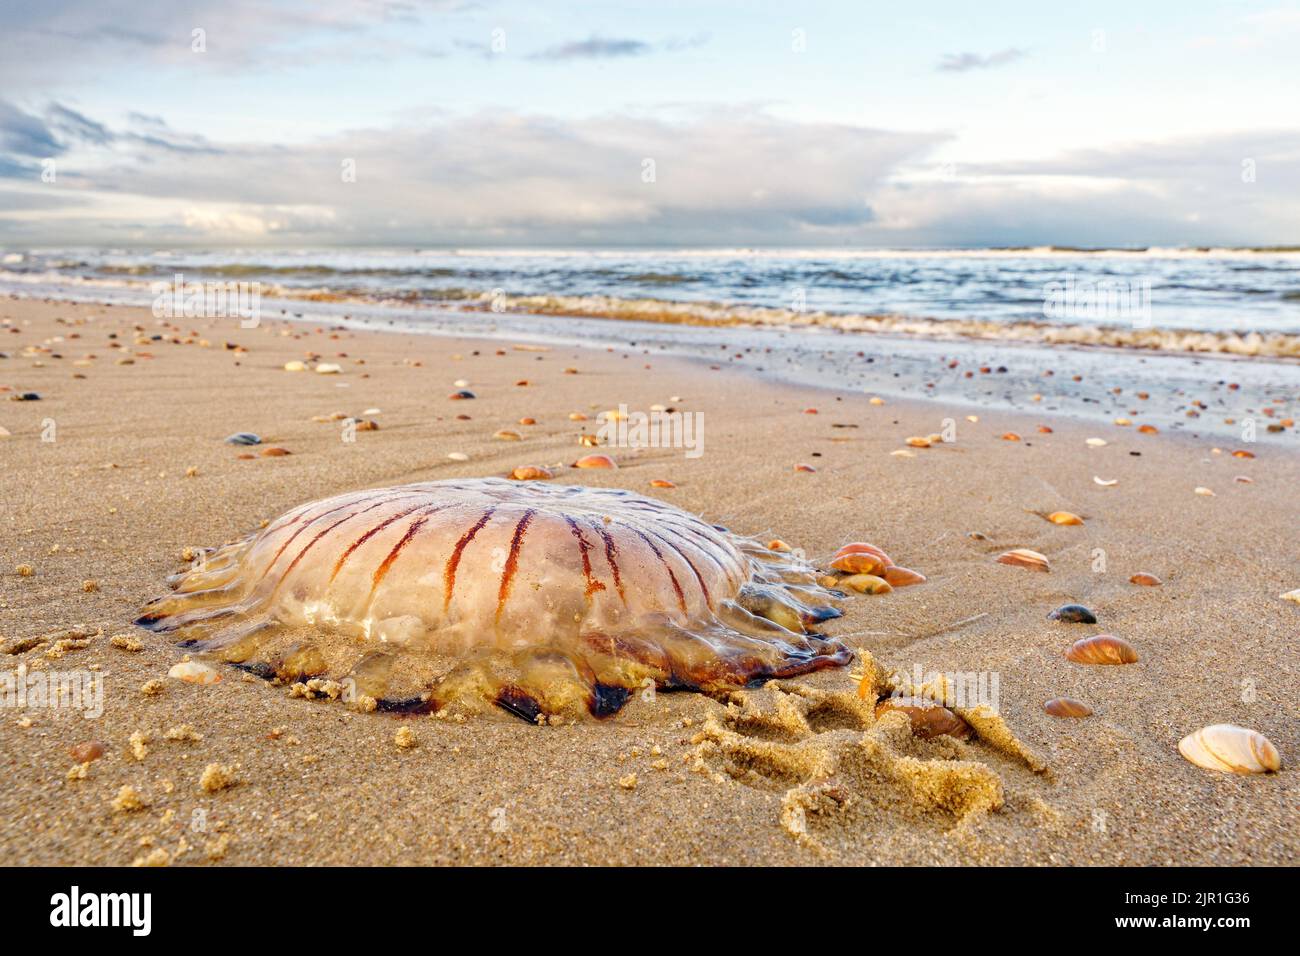 A compass jellyfish (Chrysaora hysoscella) washed ashore, lying in the sand. A dog's paw prints show the size of the jellyfish. North Holland dune res Stock Photo